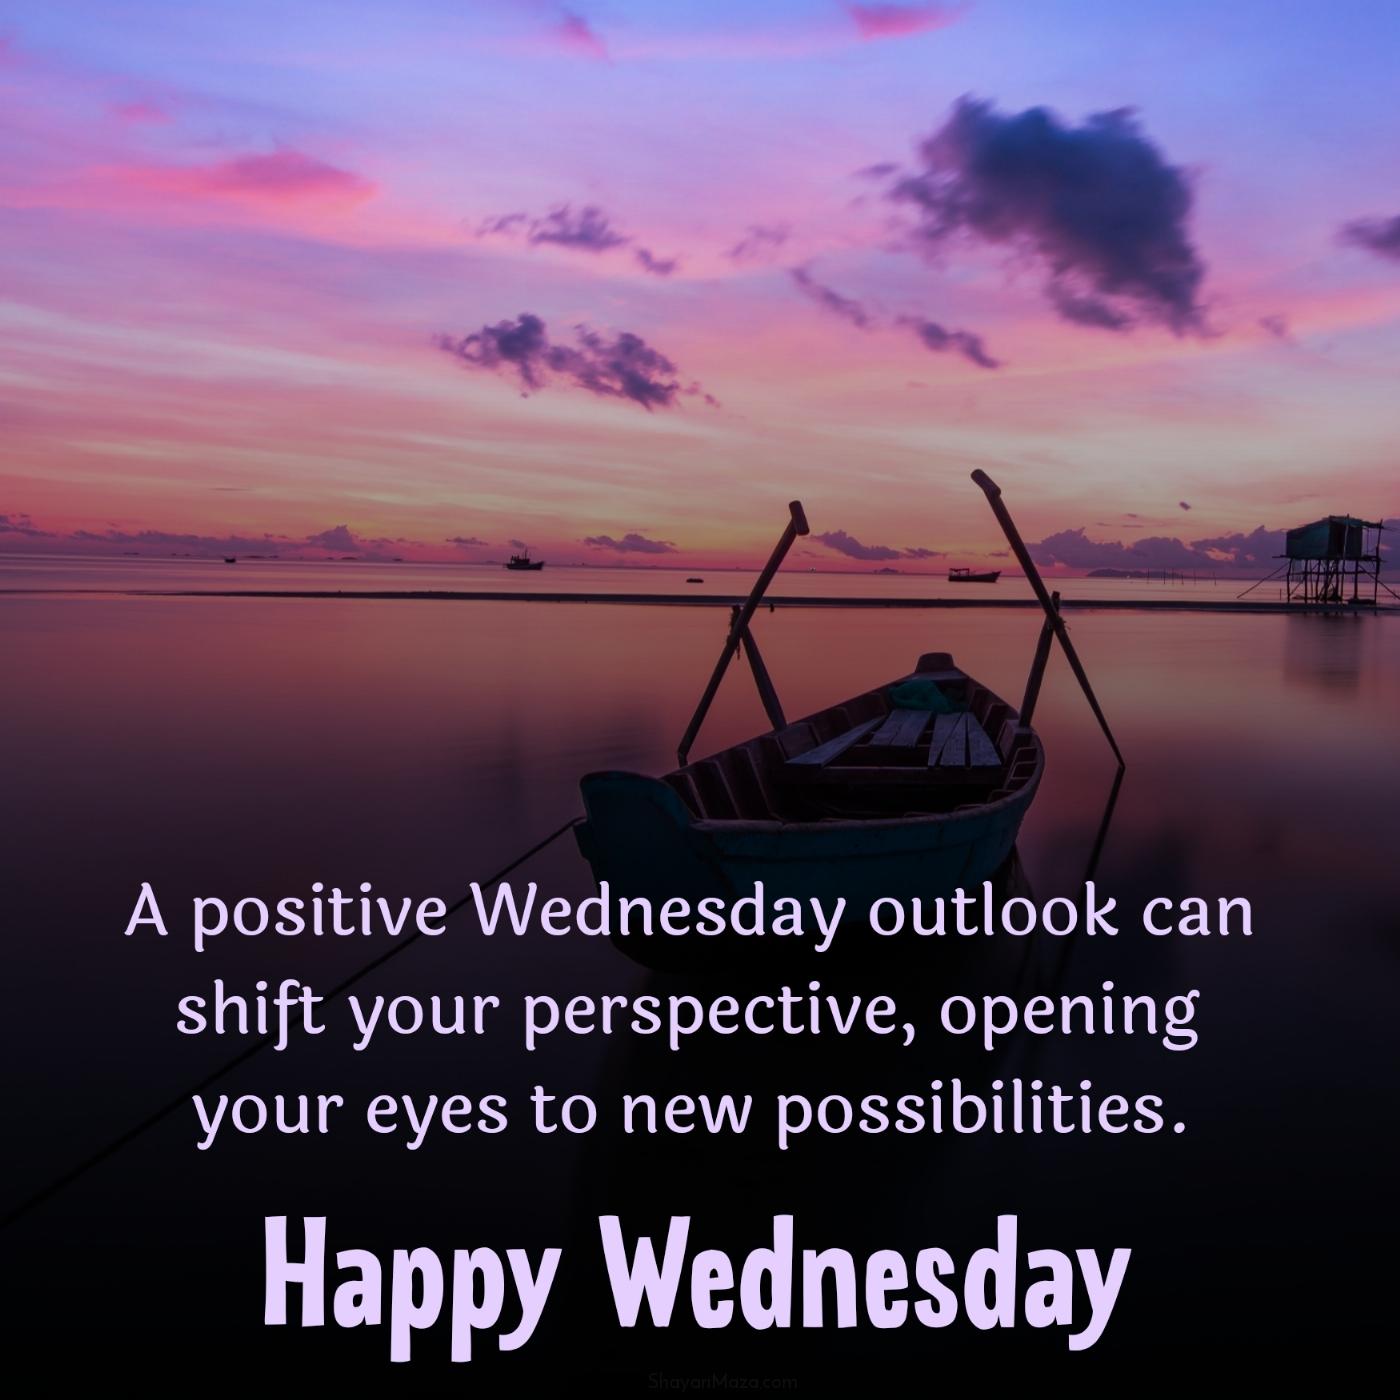 A positive Wednesday outlook can shift your perspective